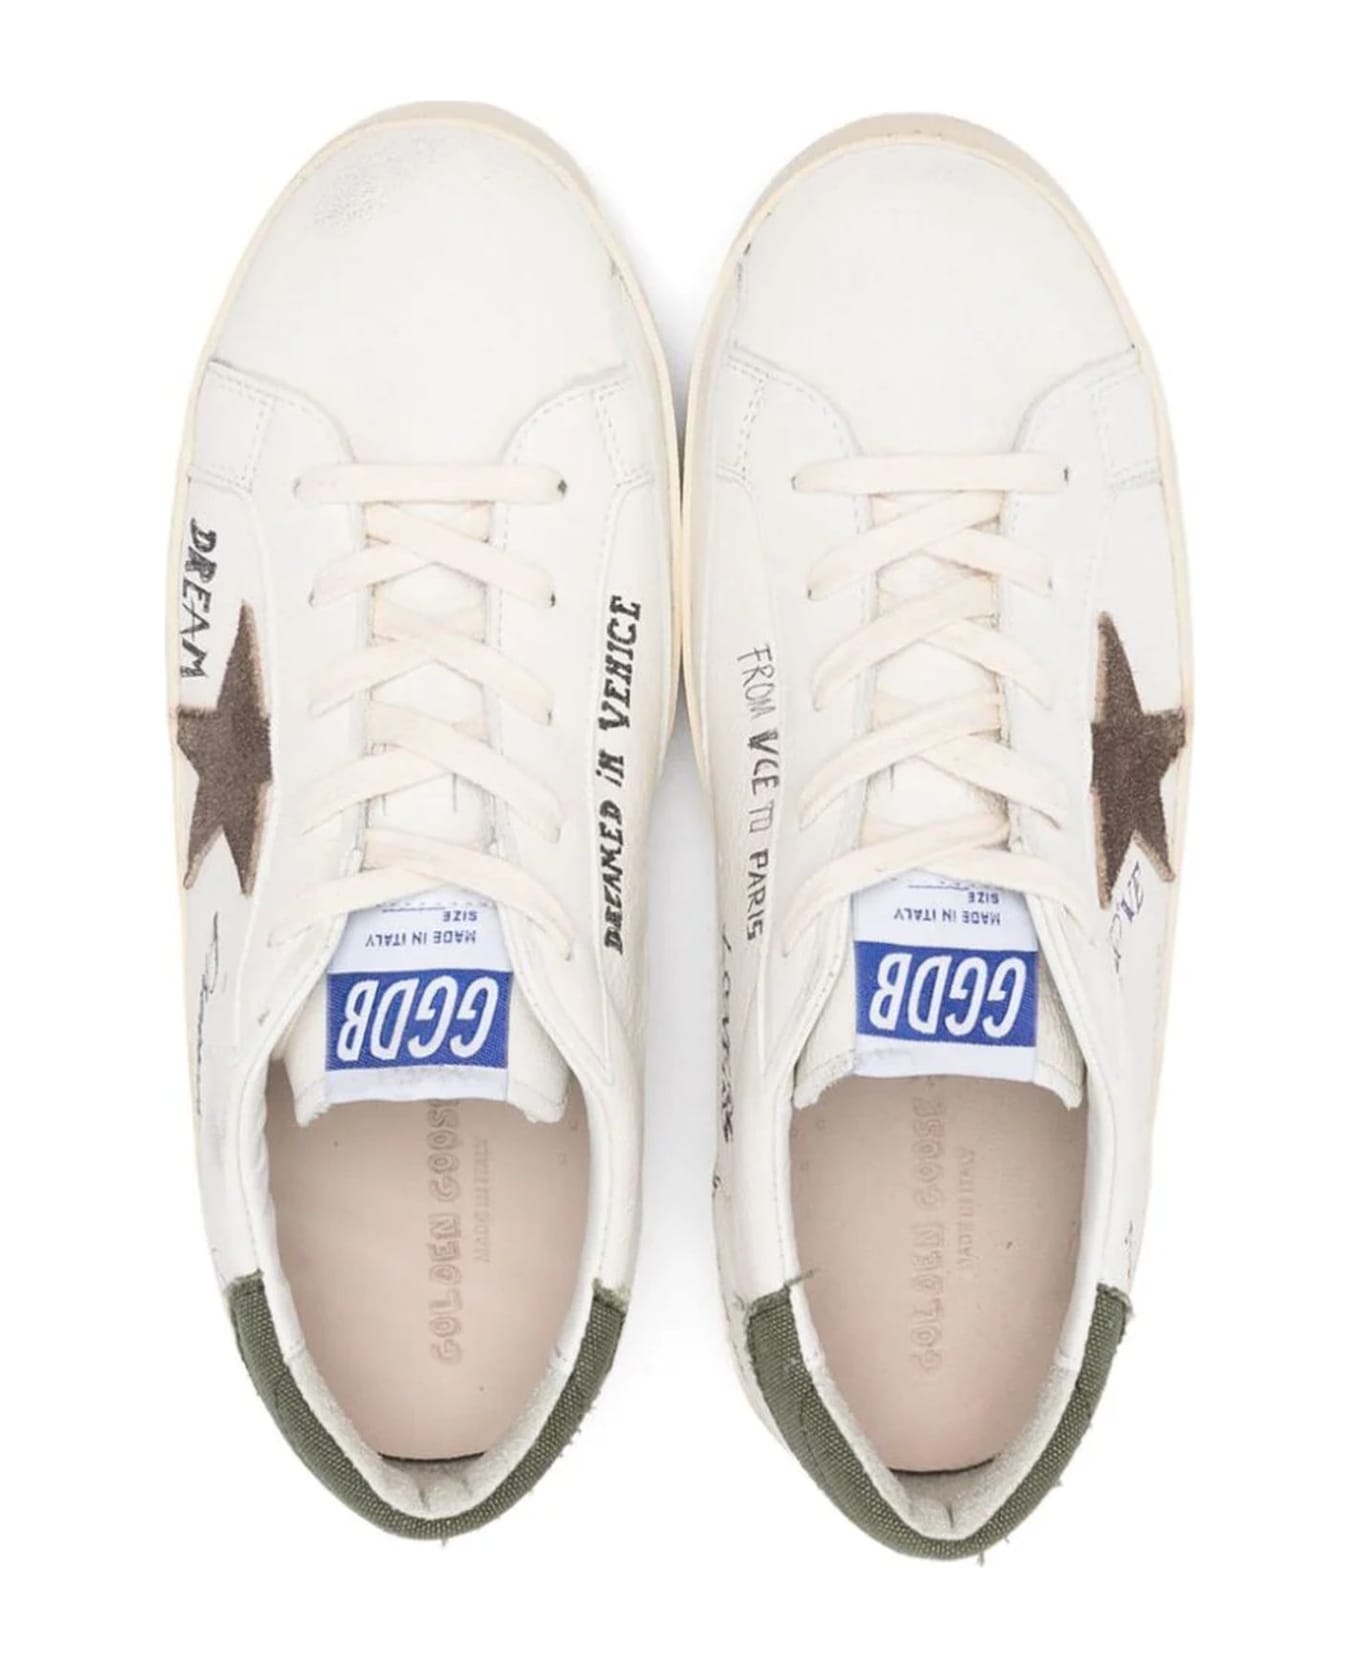 Golden Goose White Leather Sneakers - White/brown/green